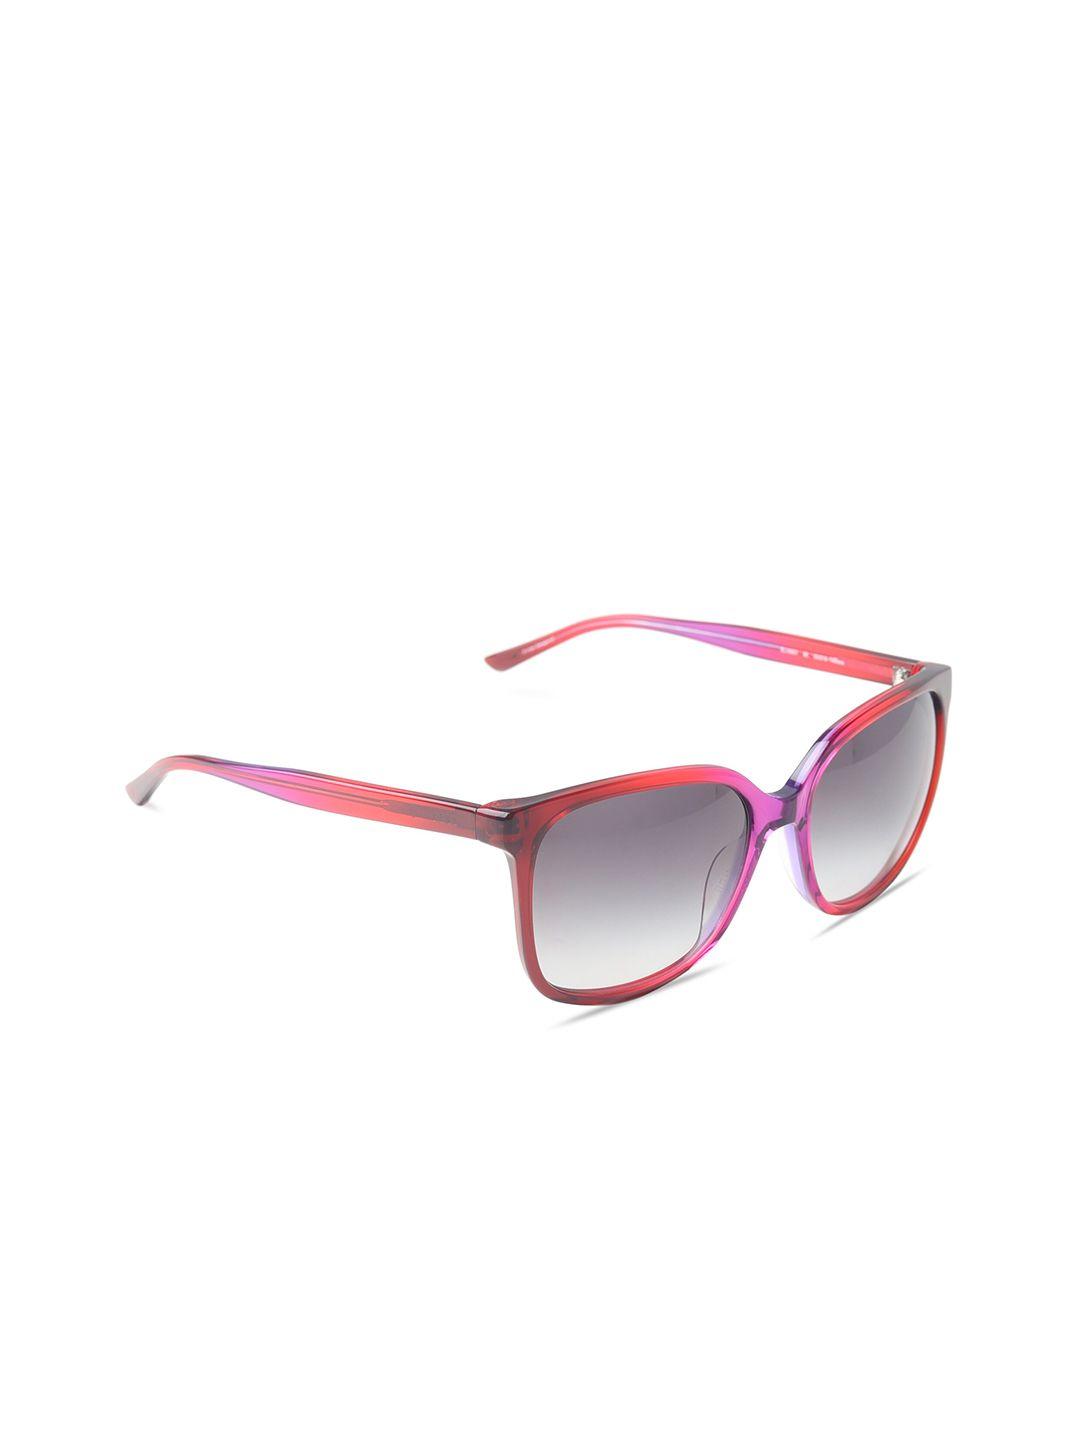 elle women grey lens & pink aviator sunglasses with uv protected lens